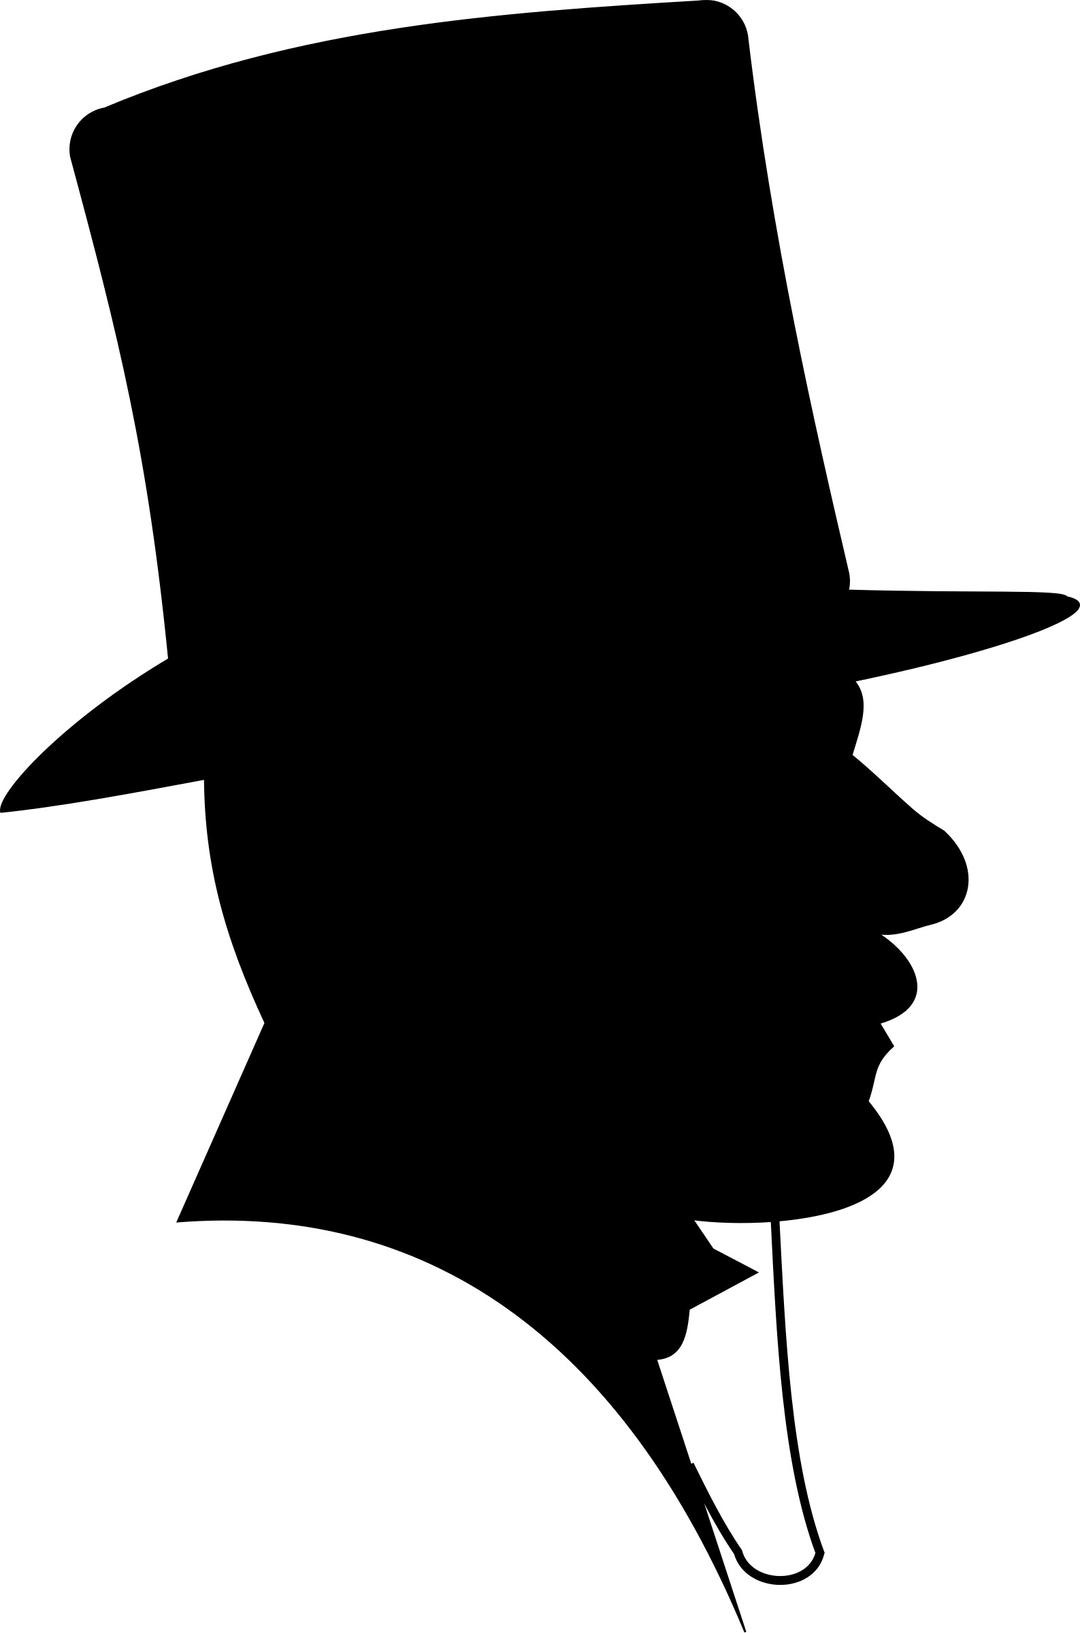 Victorian Man Silhouette Top Hat png transparent